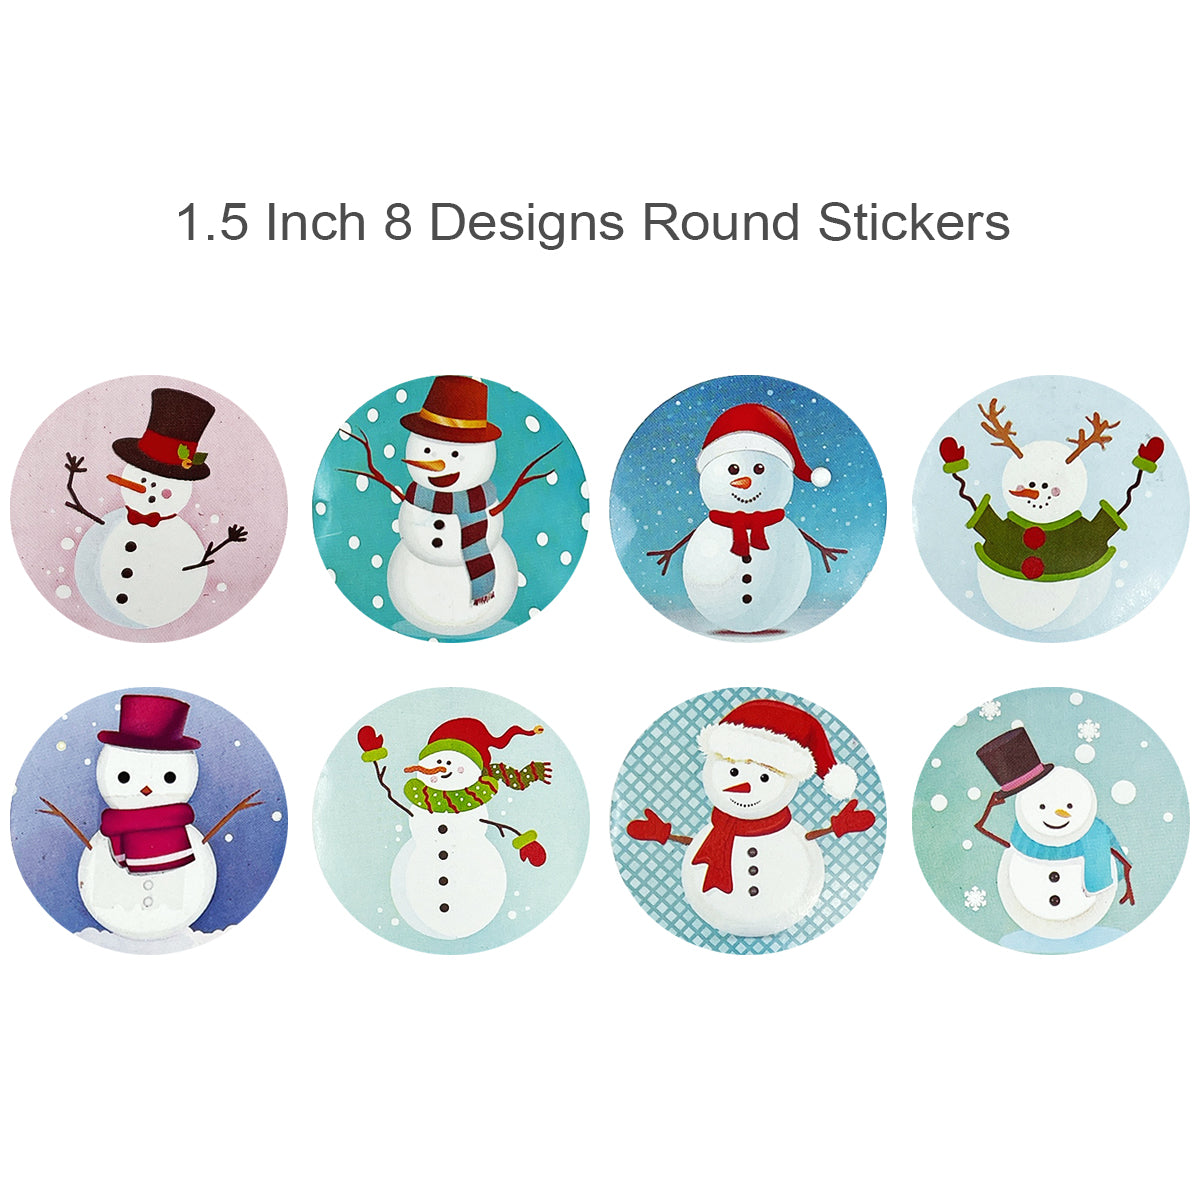 Wrapables Christmas Stickers Label Roll, Holiday Stickers for Sealing Cards, Envelopes, Gift Boxes, Festive Party Favors (500 Pcs) Festive